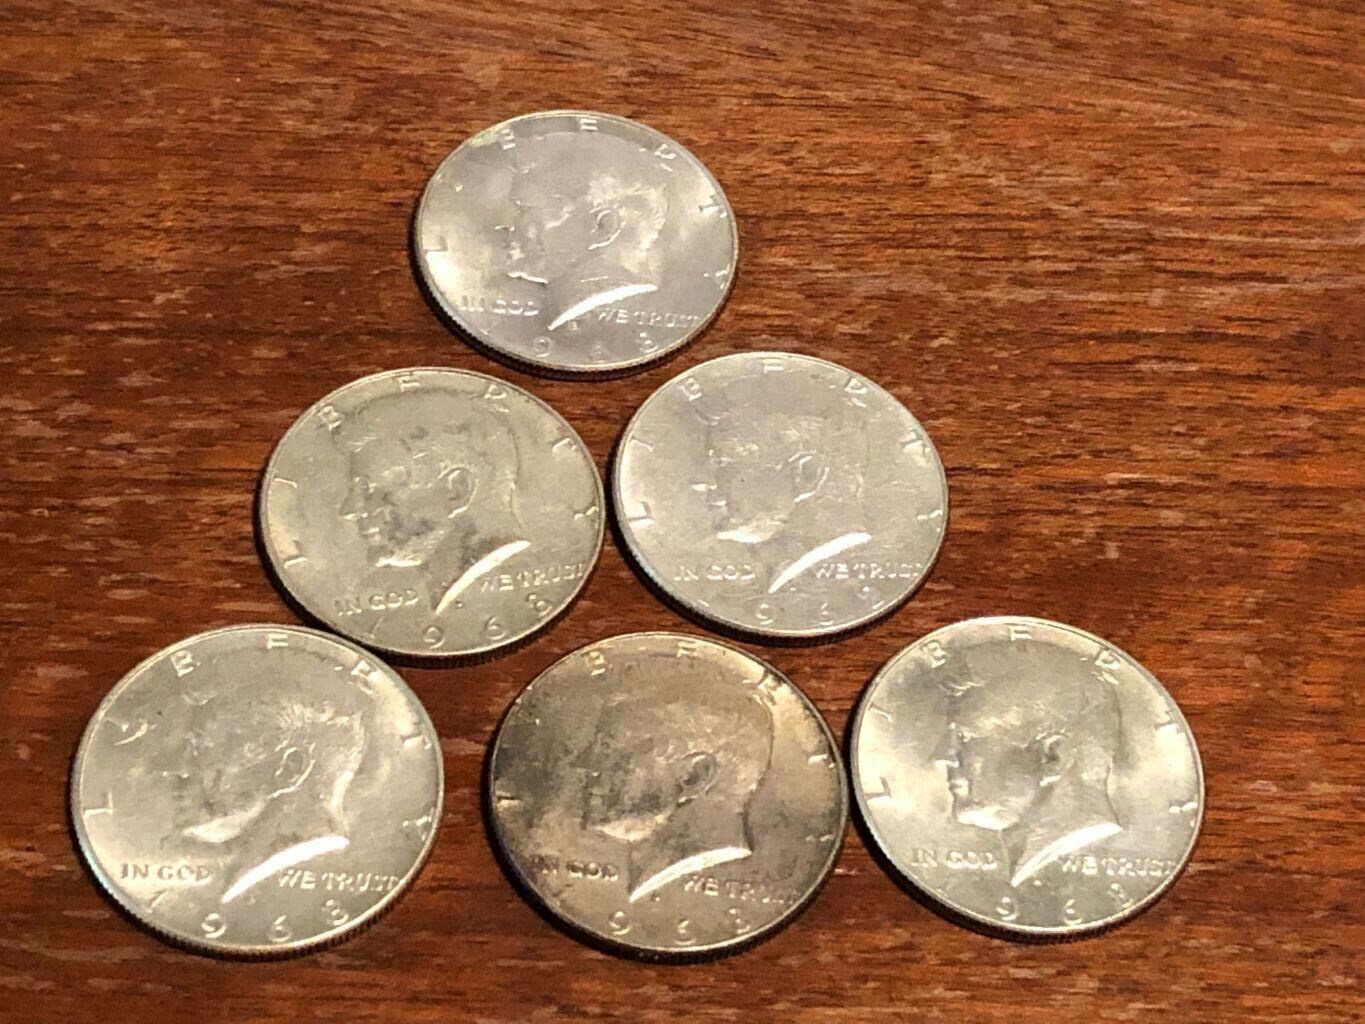 1968 D Kennedy Half Dollar Lot 6 Coin's 40% Silver 50 cent coin lot Not 5 but 6 Без бренда